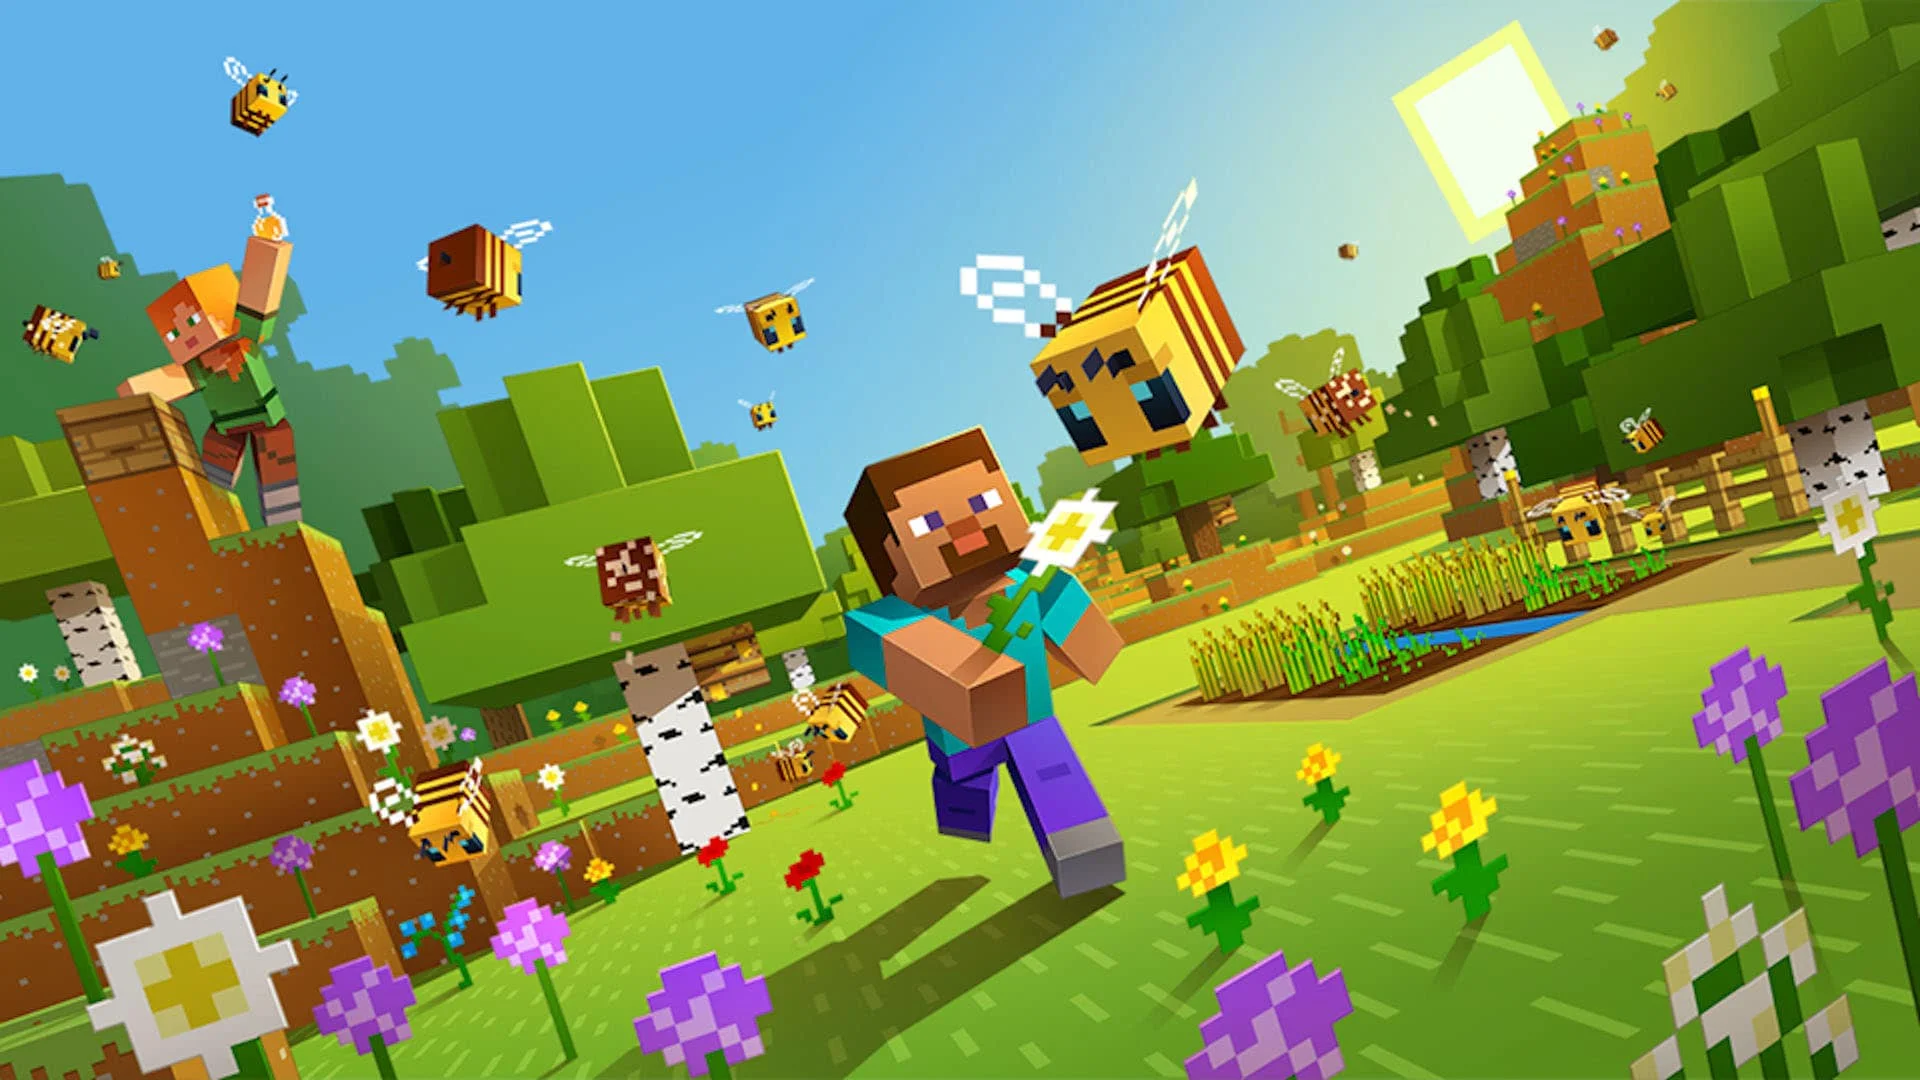 Minecraft fans don't want to participate in activities offered by Mojang